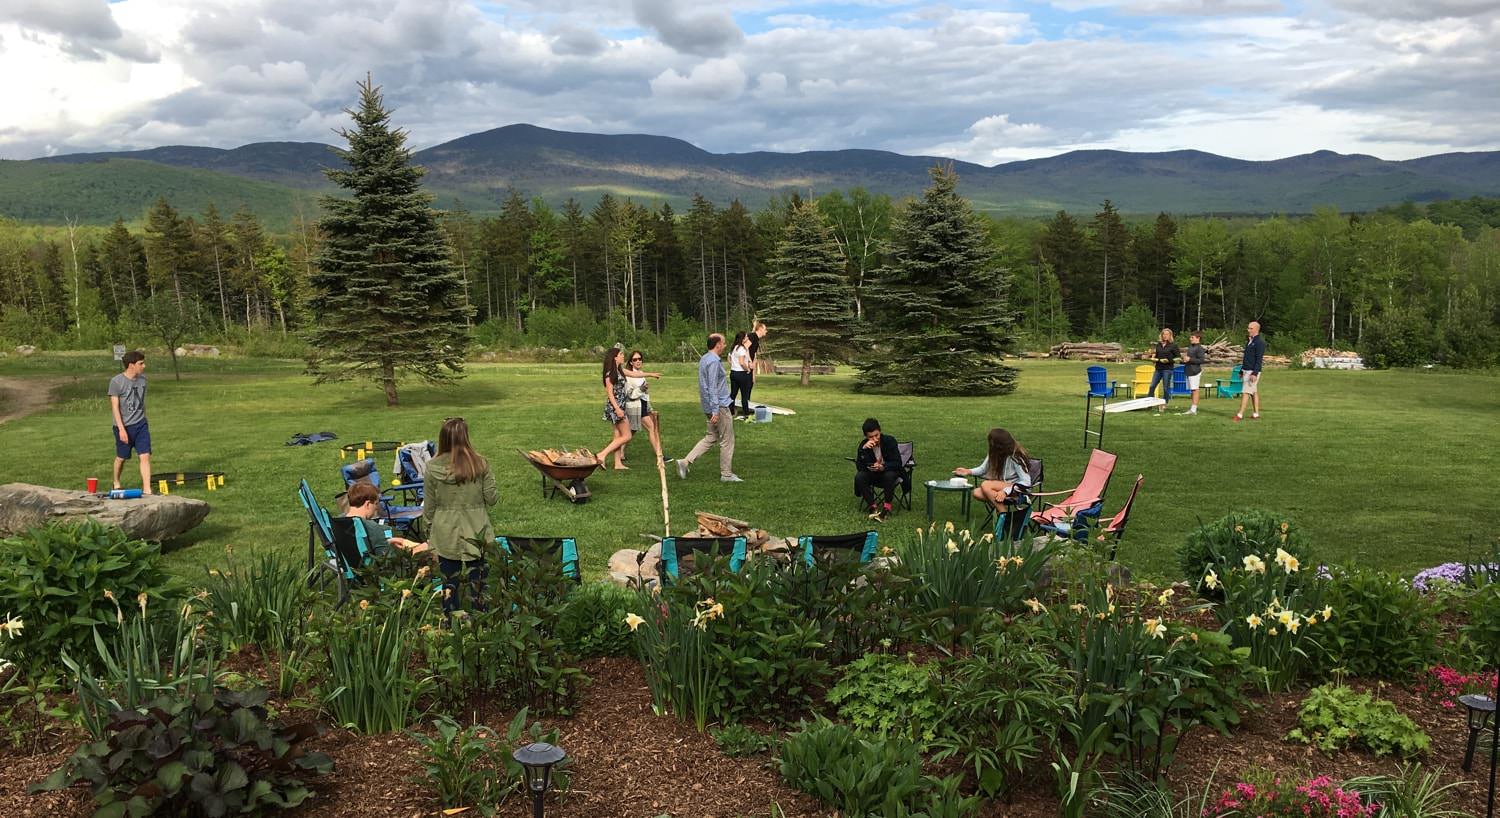 Several people in the common area enjoying yard games and the campfire surrounded by pine trees and distant hills